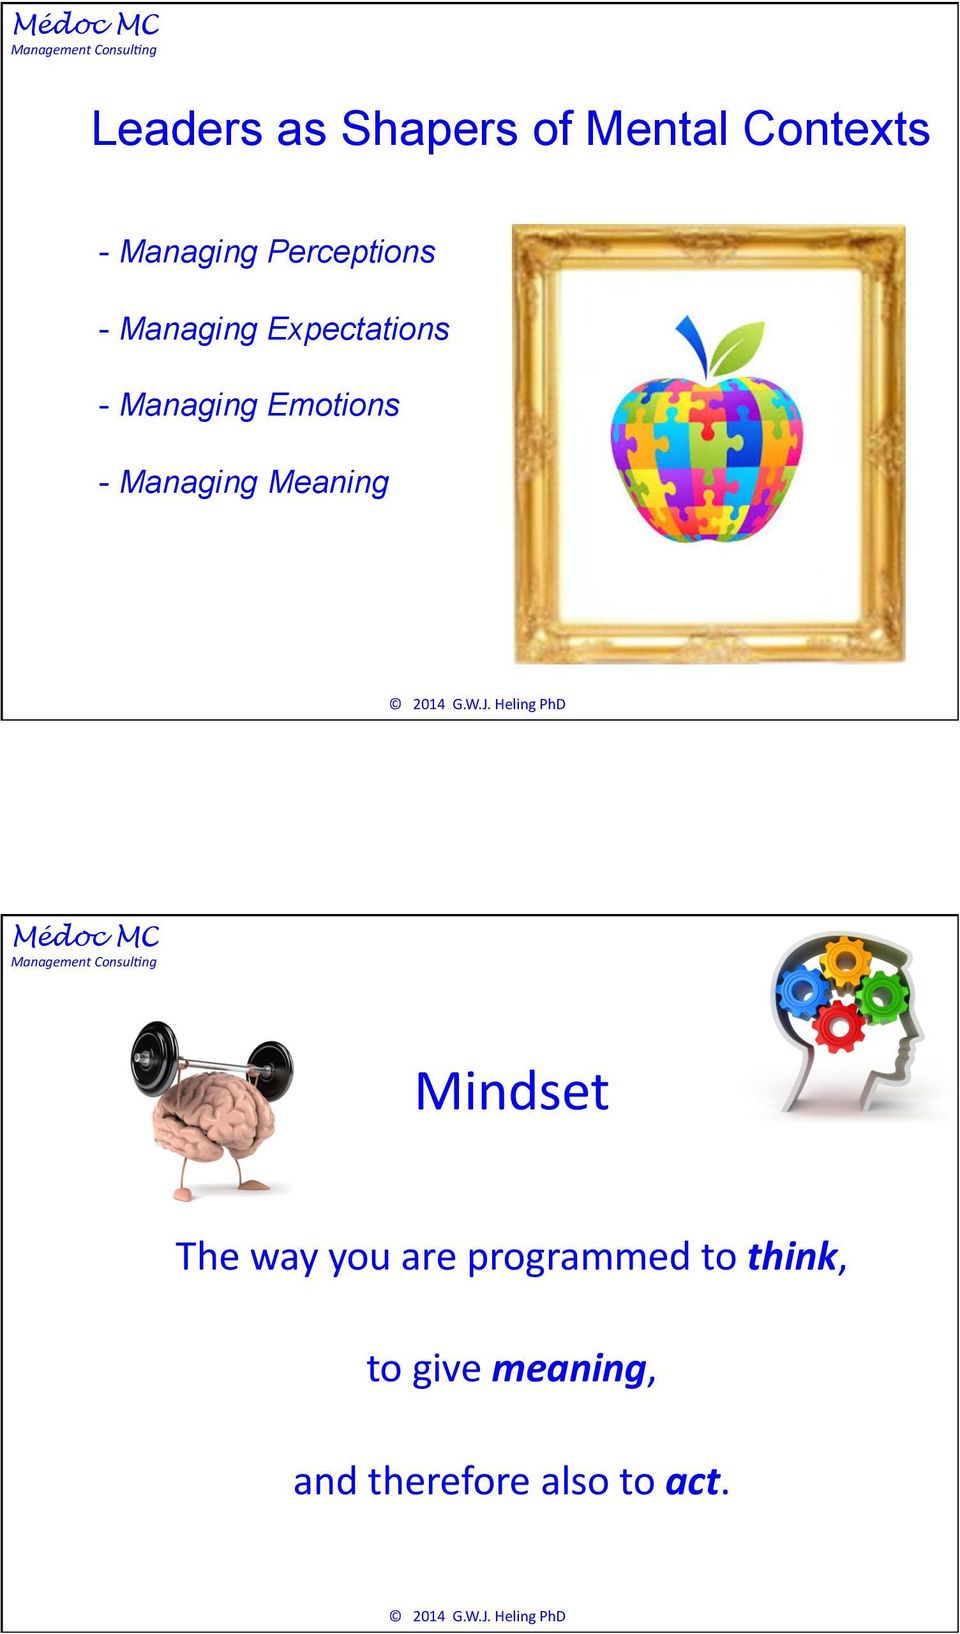 Emotions - Managing Meaning Mindset The way you are